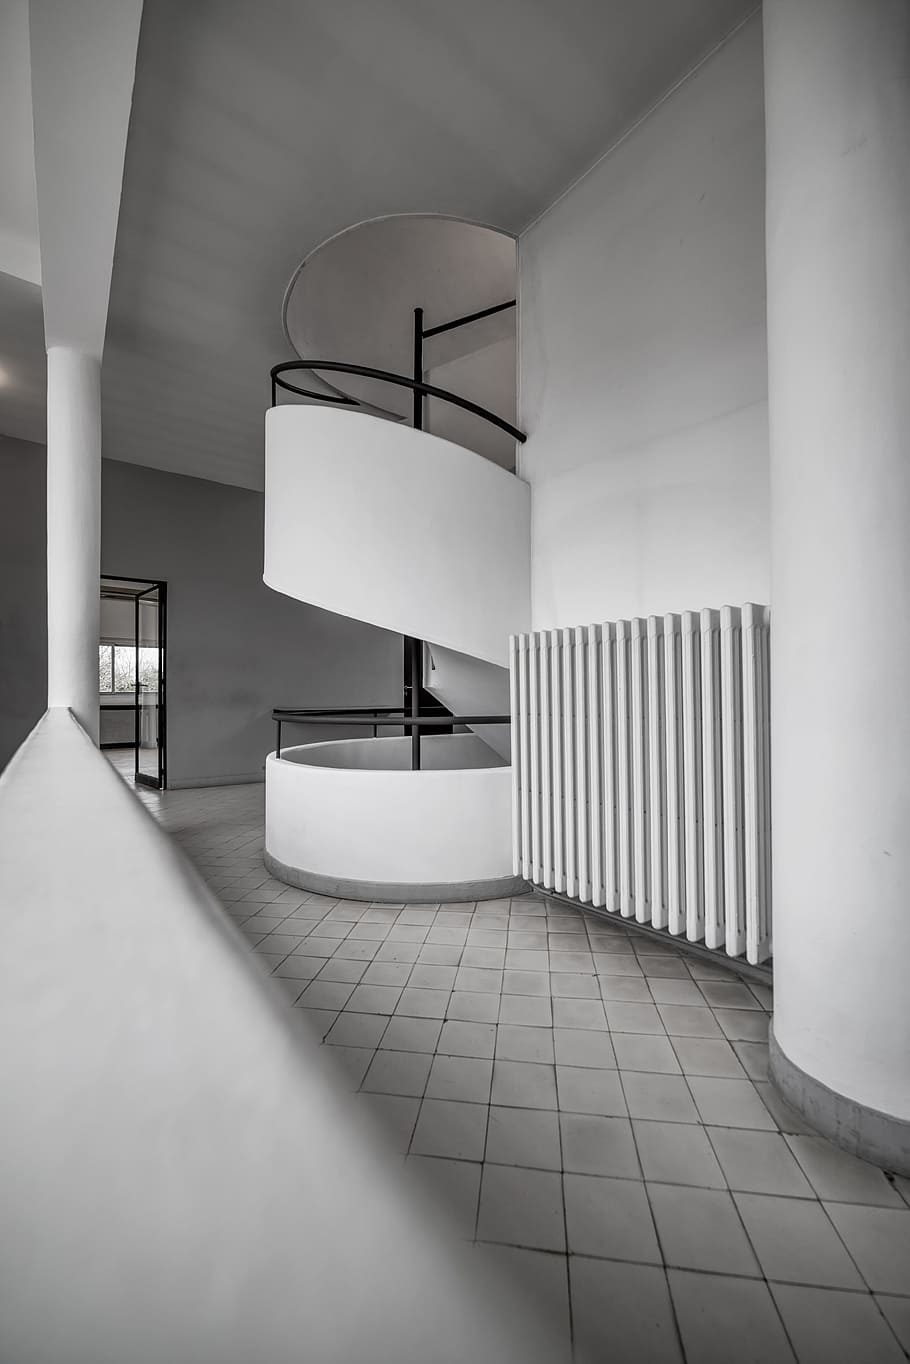 stairs, black-and-white, architecture, inside, black and white